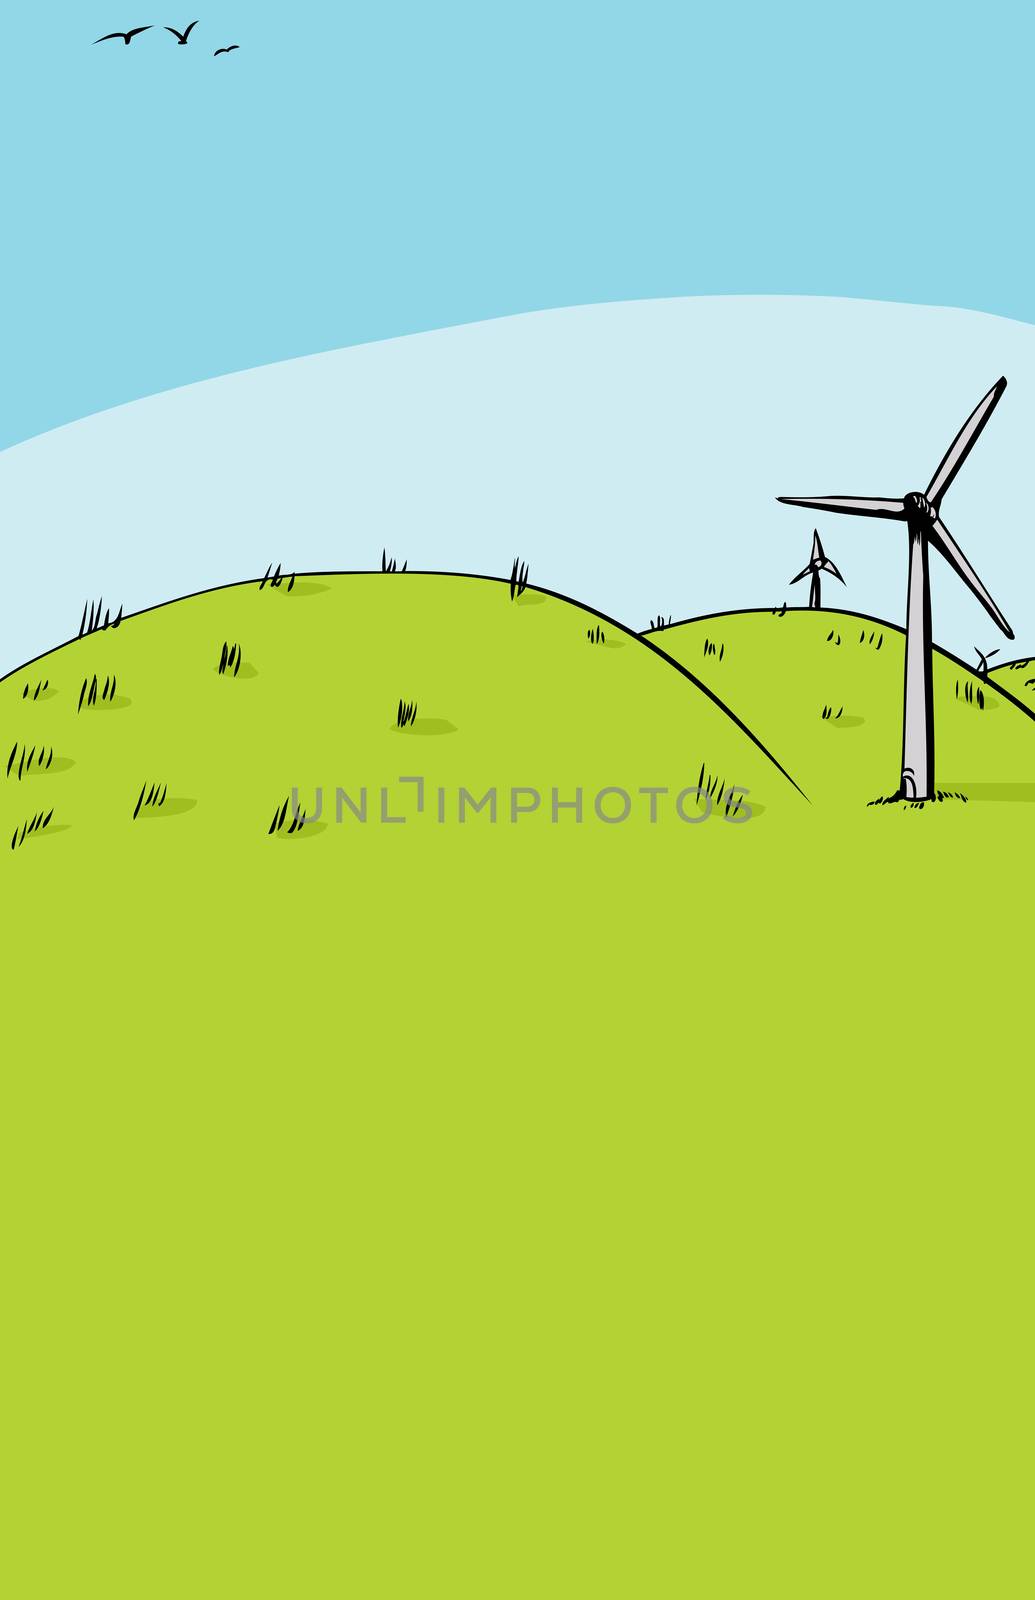 Cartoon background of three wind turbines on side of green rolling hills with copy space